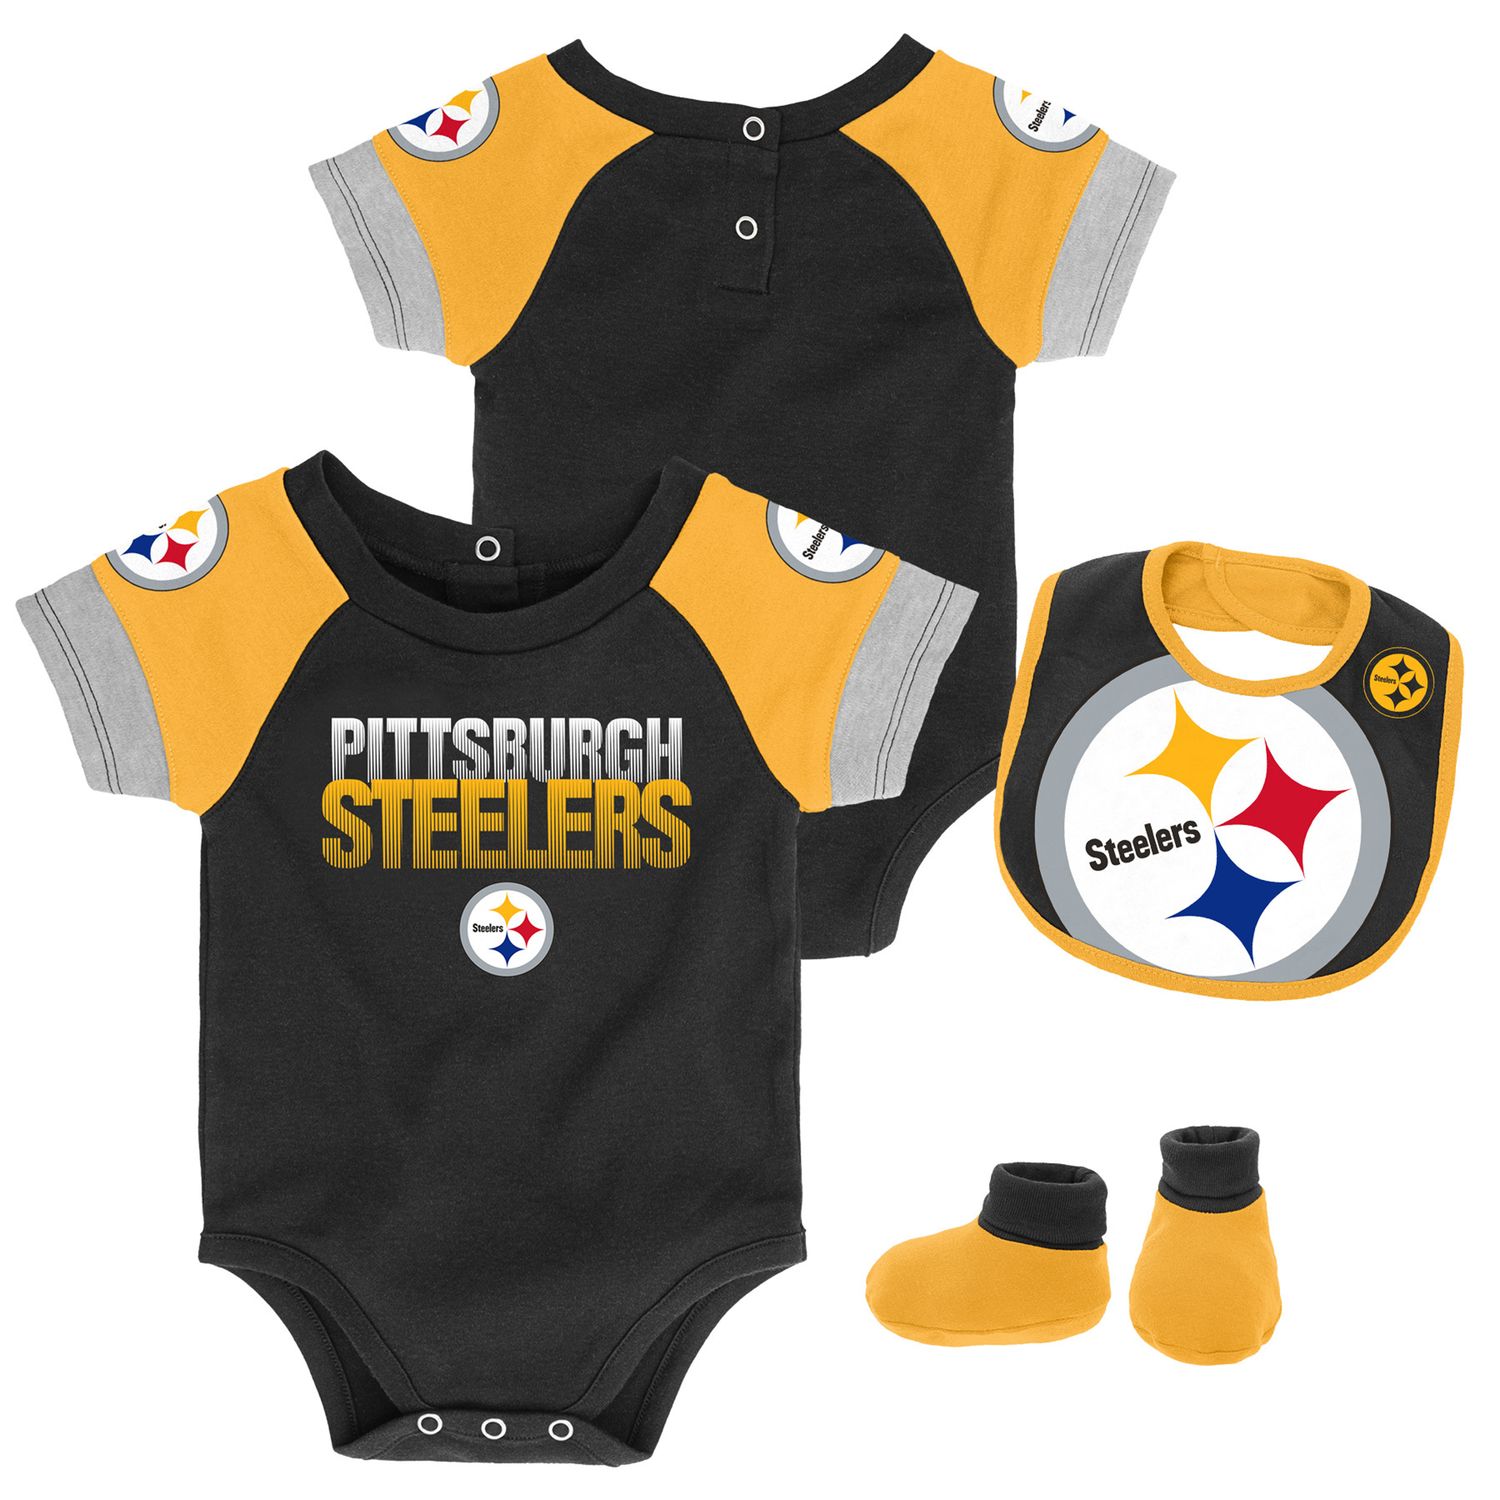 baby steelers jersey